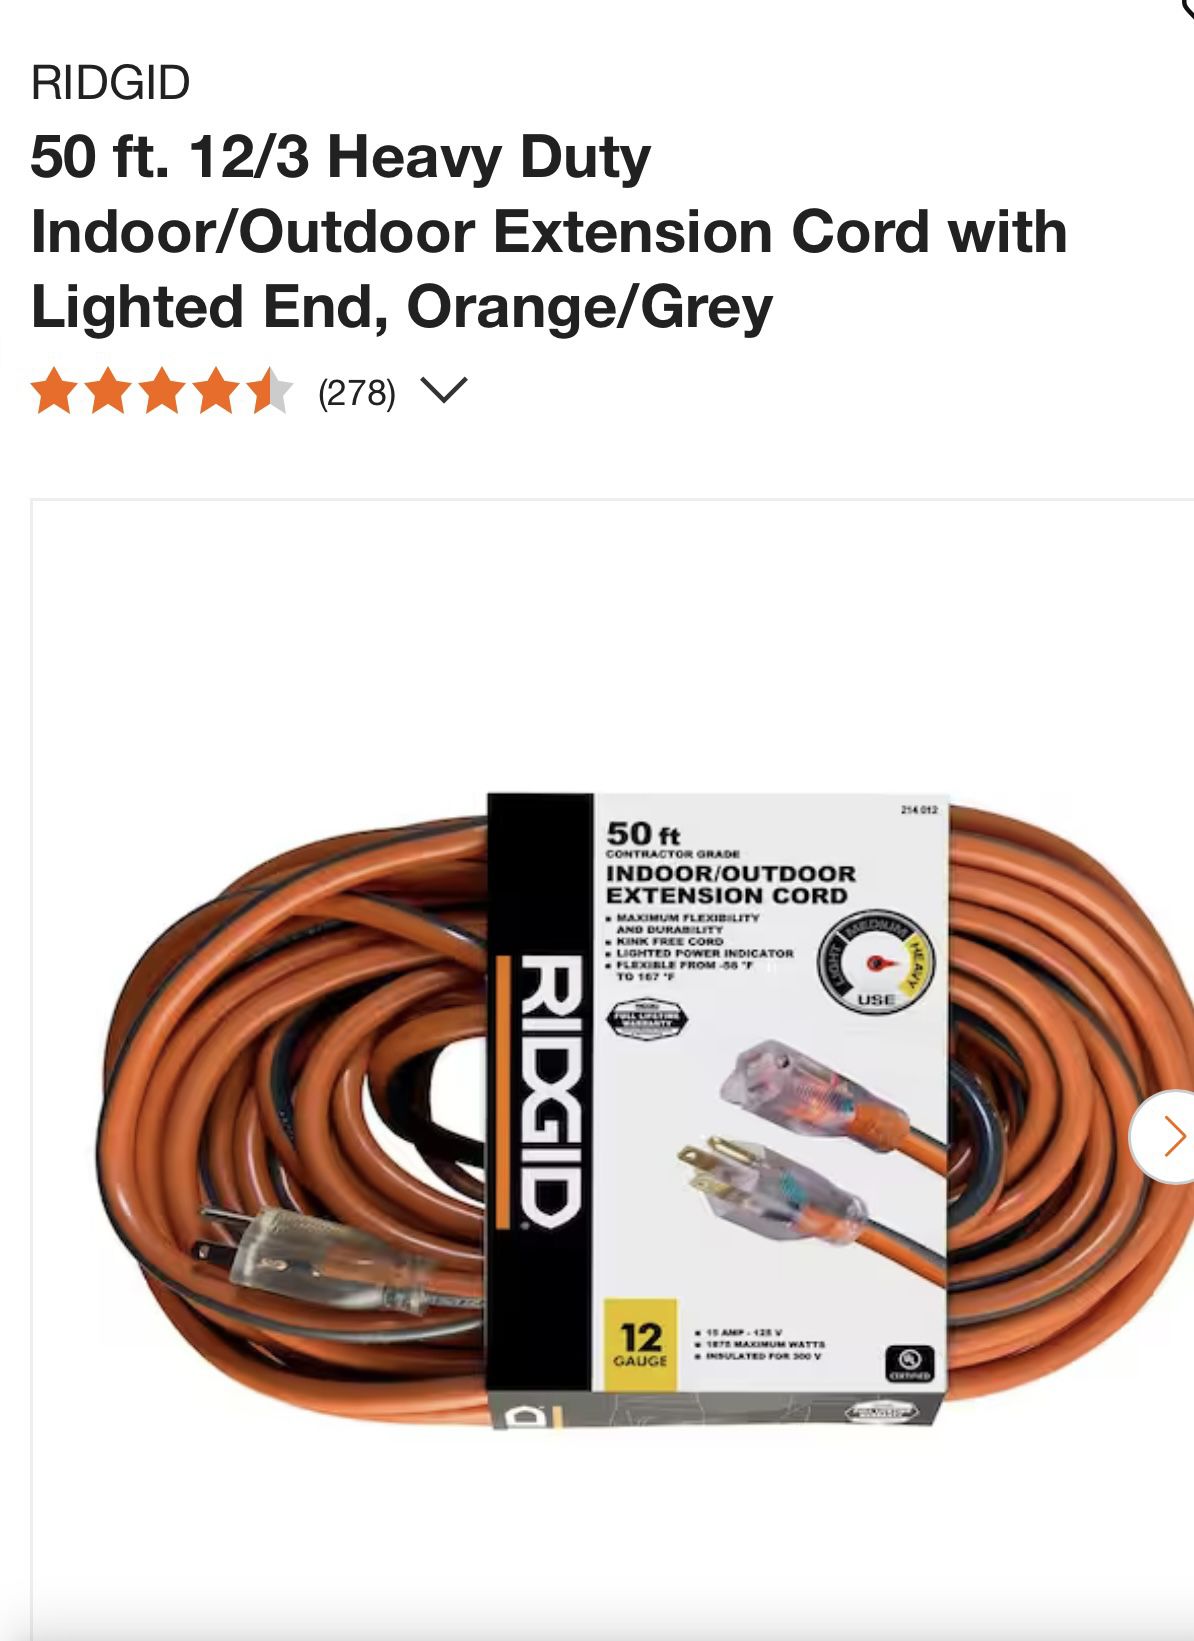 RIDGID 50 ft. 12/3 Heavy Duty Indoor/Outdoor Extension Cord with Lighted End, Orange/Grey (278)